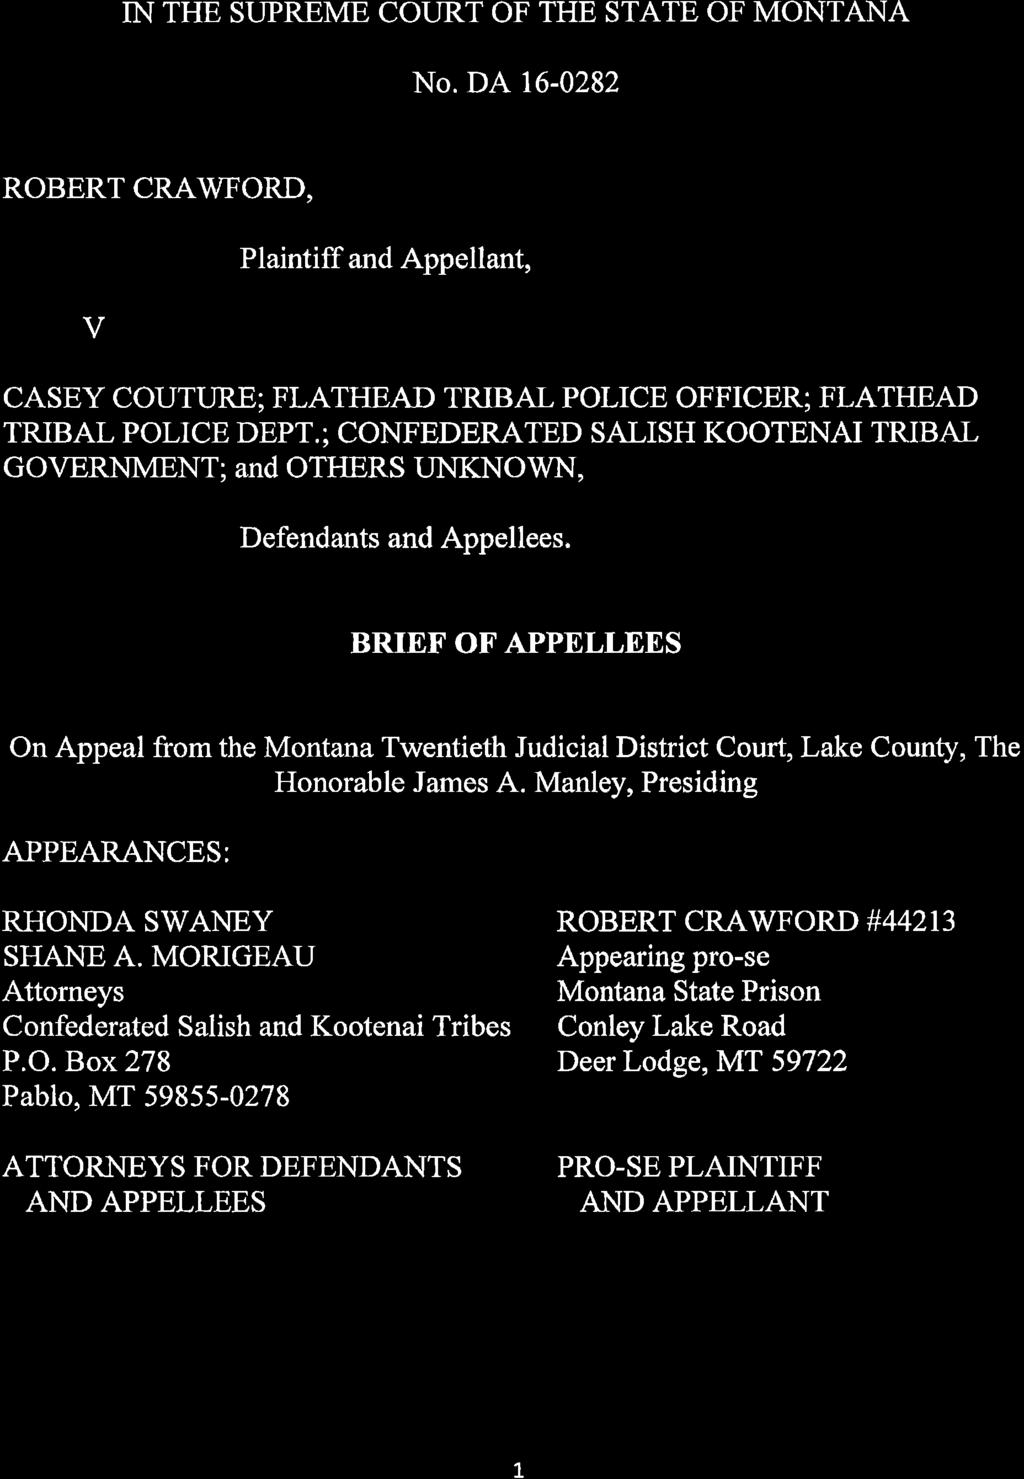 ; CONFEDERATED SALISH KOOTENAI TRIBAL GOVERNMENT; and OTHERS UNKNOWN, Defendants and Appellees.